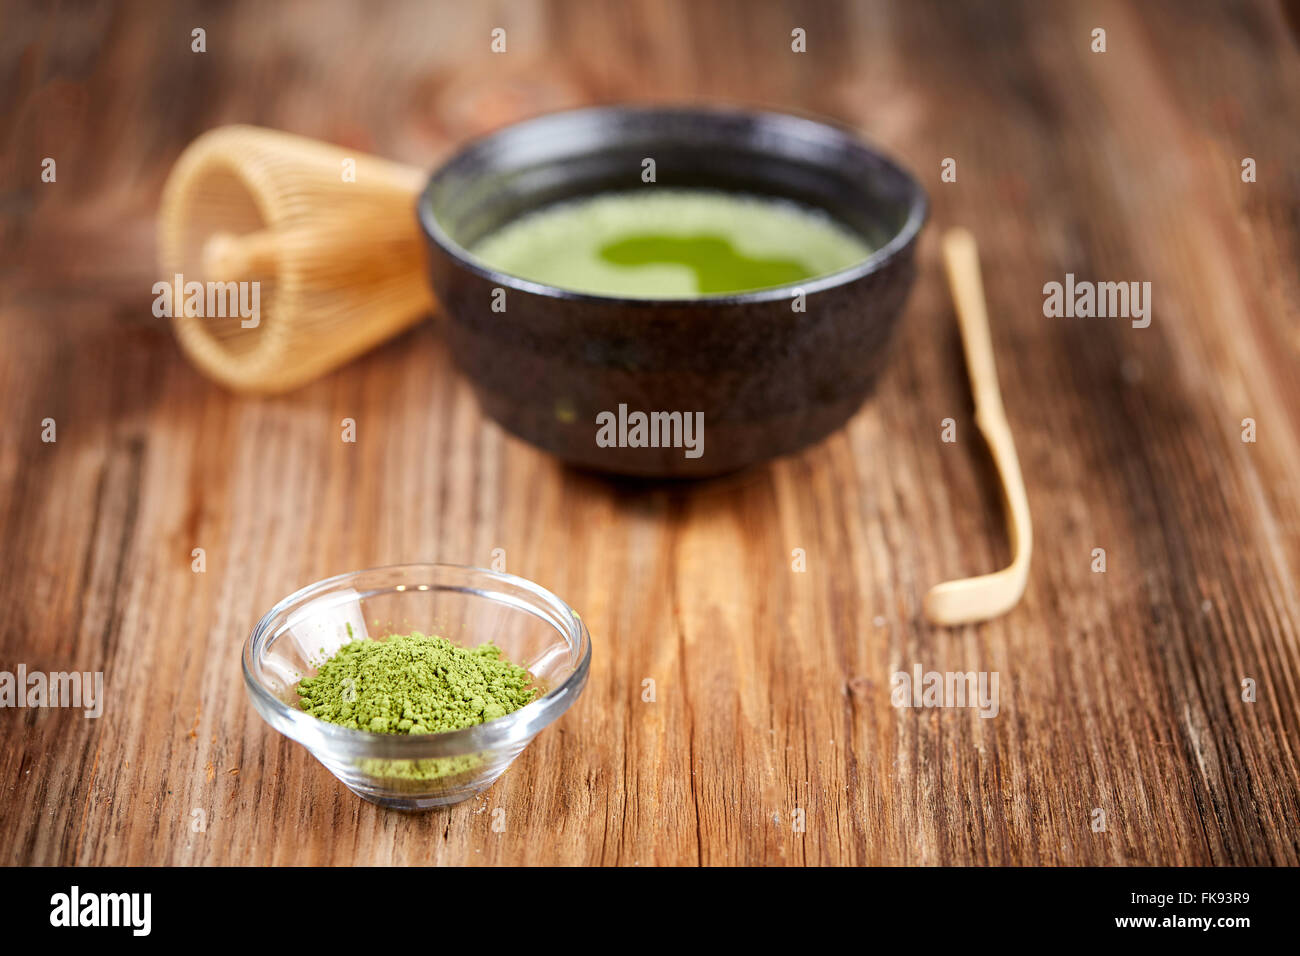 Green matcha tea and powder, whisk and spoon on a wooden table Stock Photo